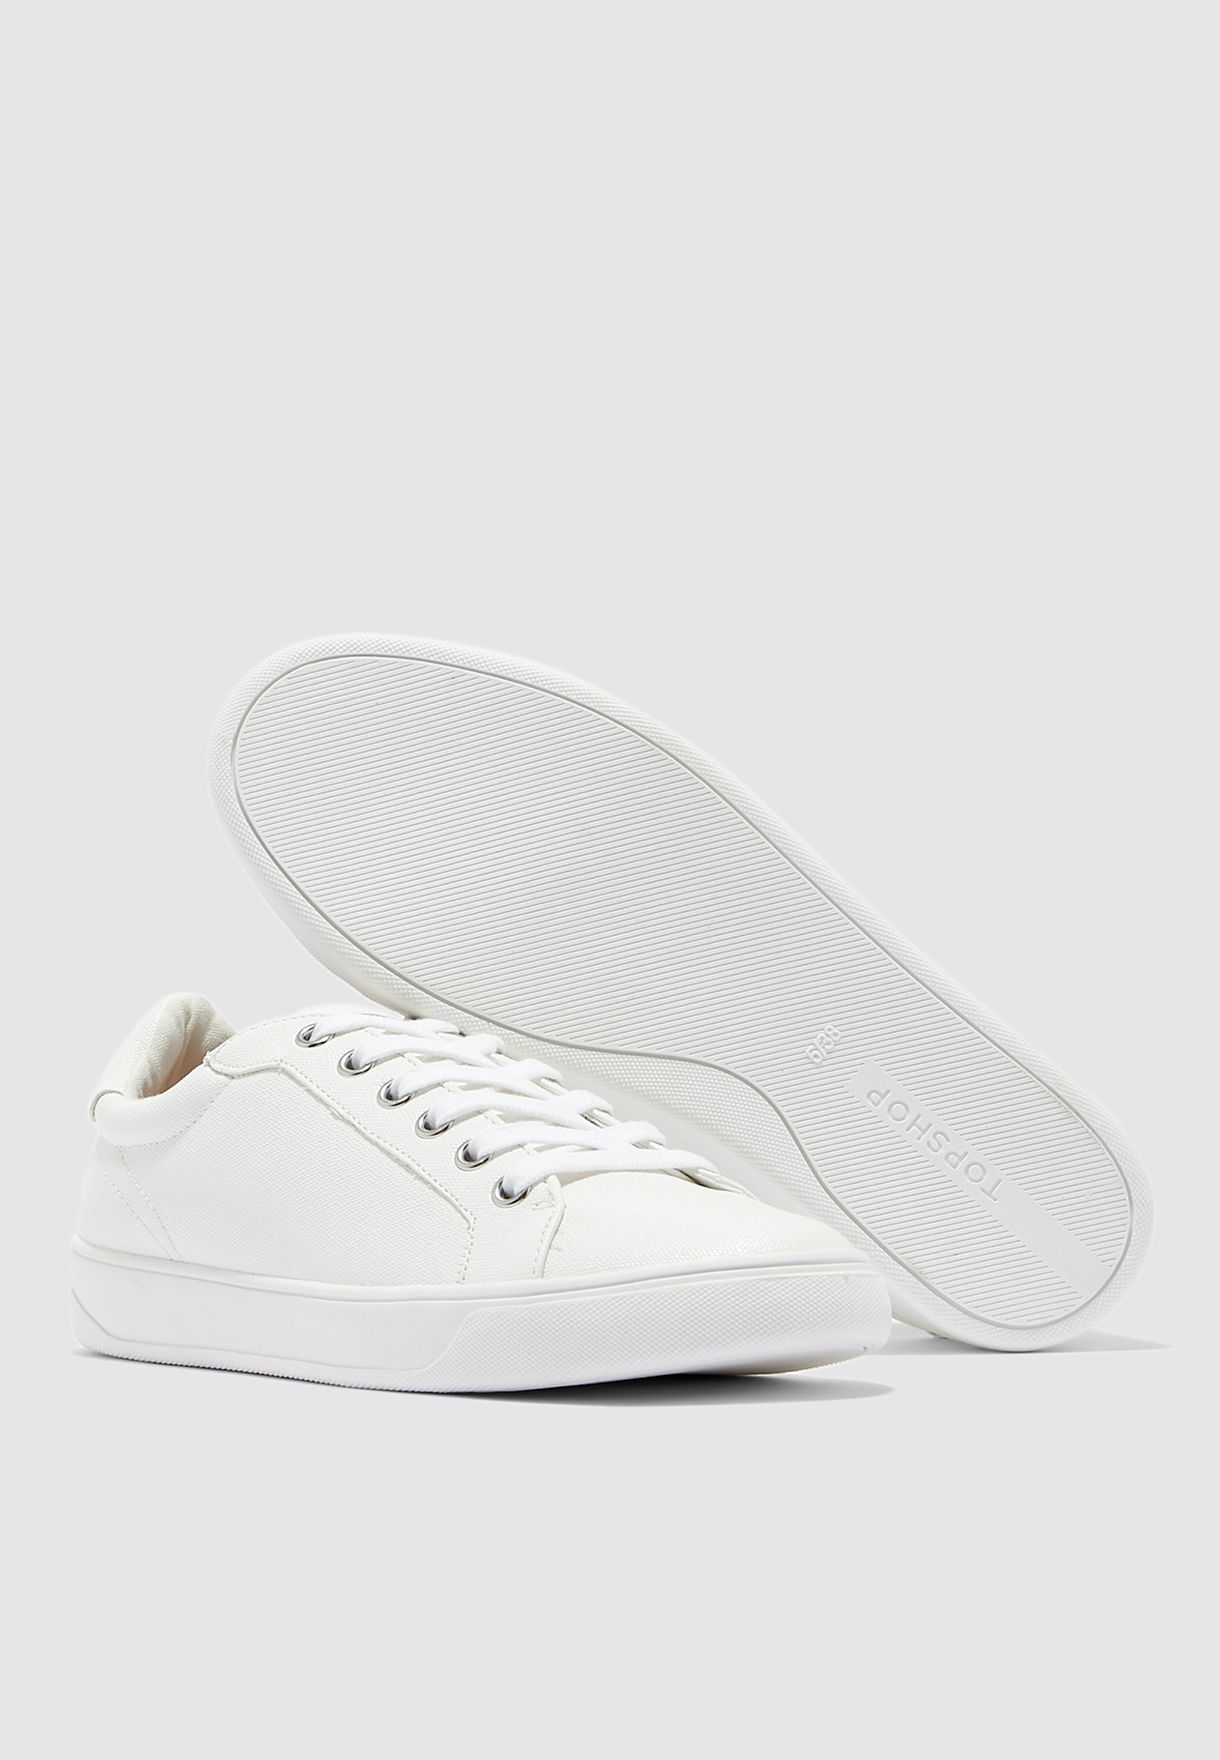 Cola Lace Up Trainer Sneaker - White 